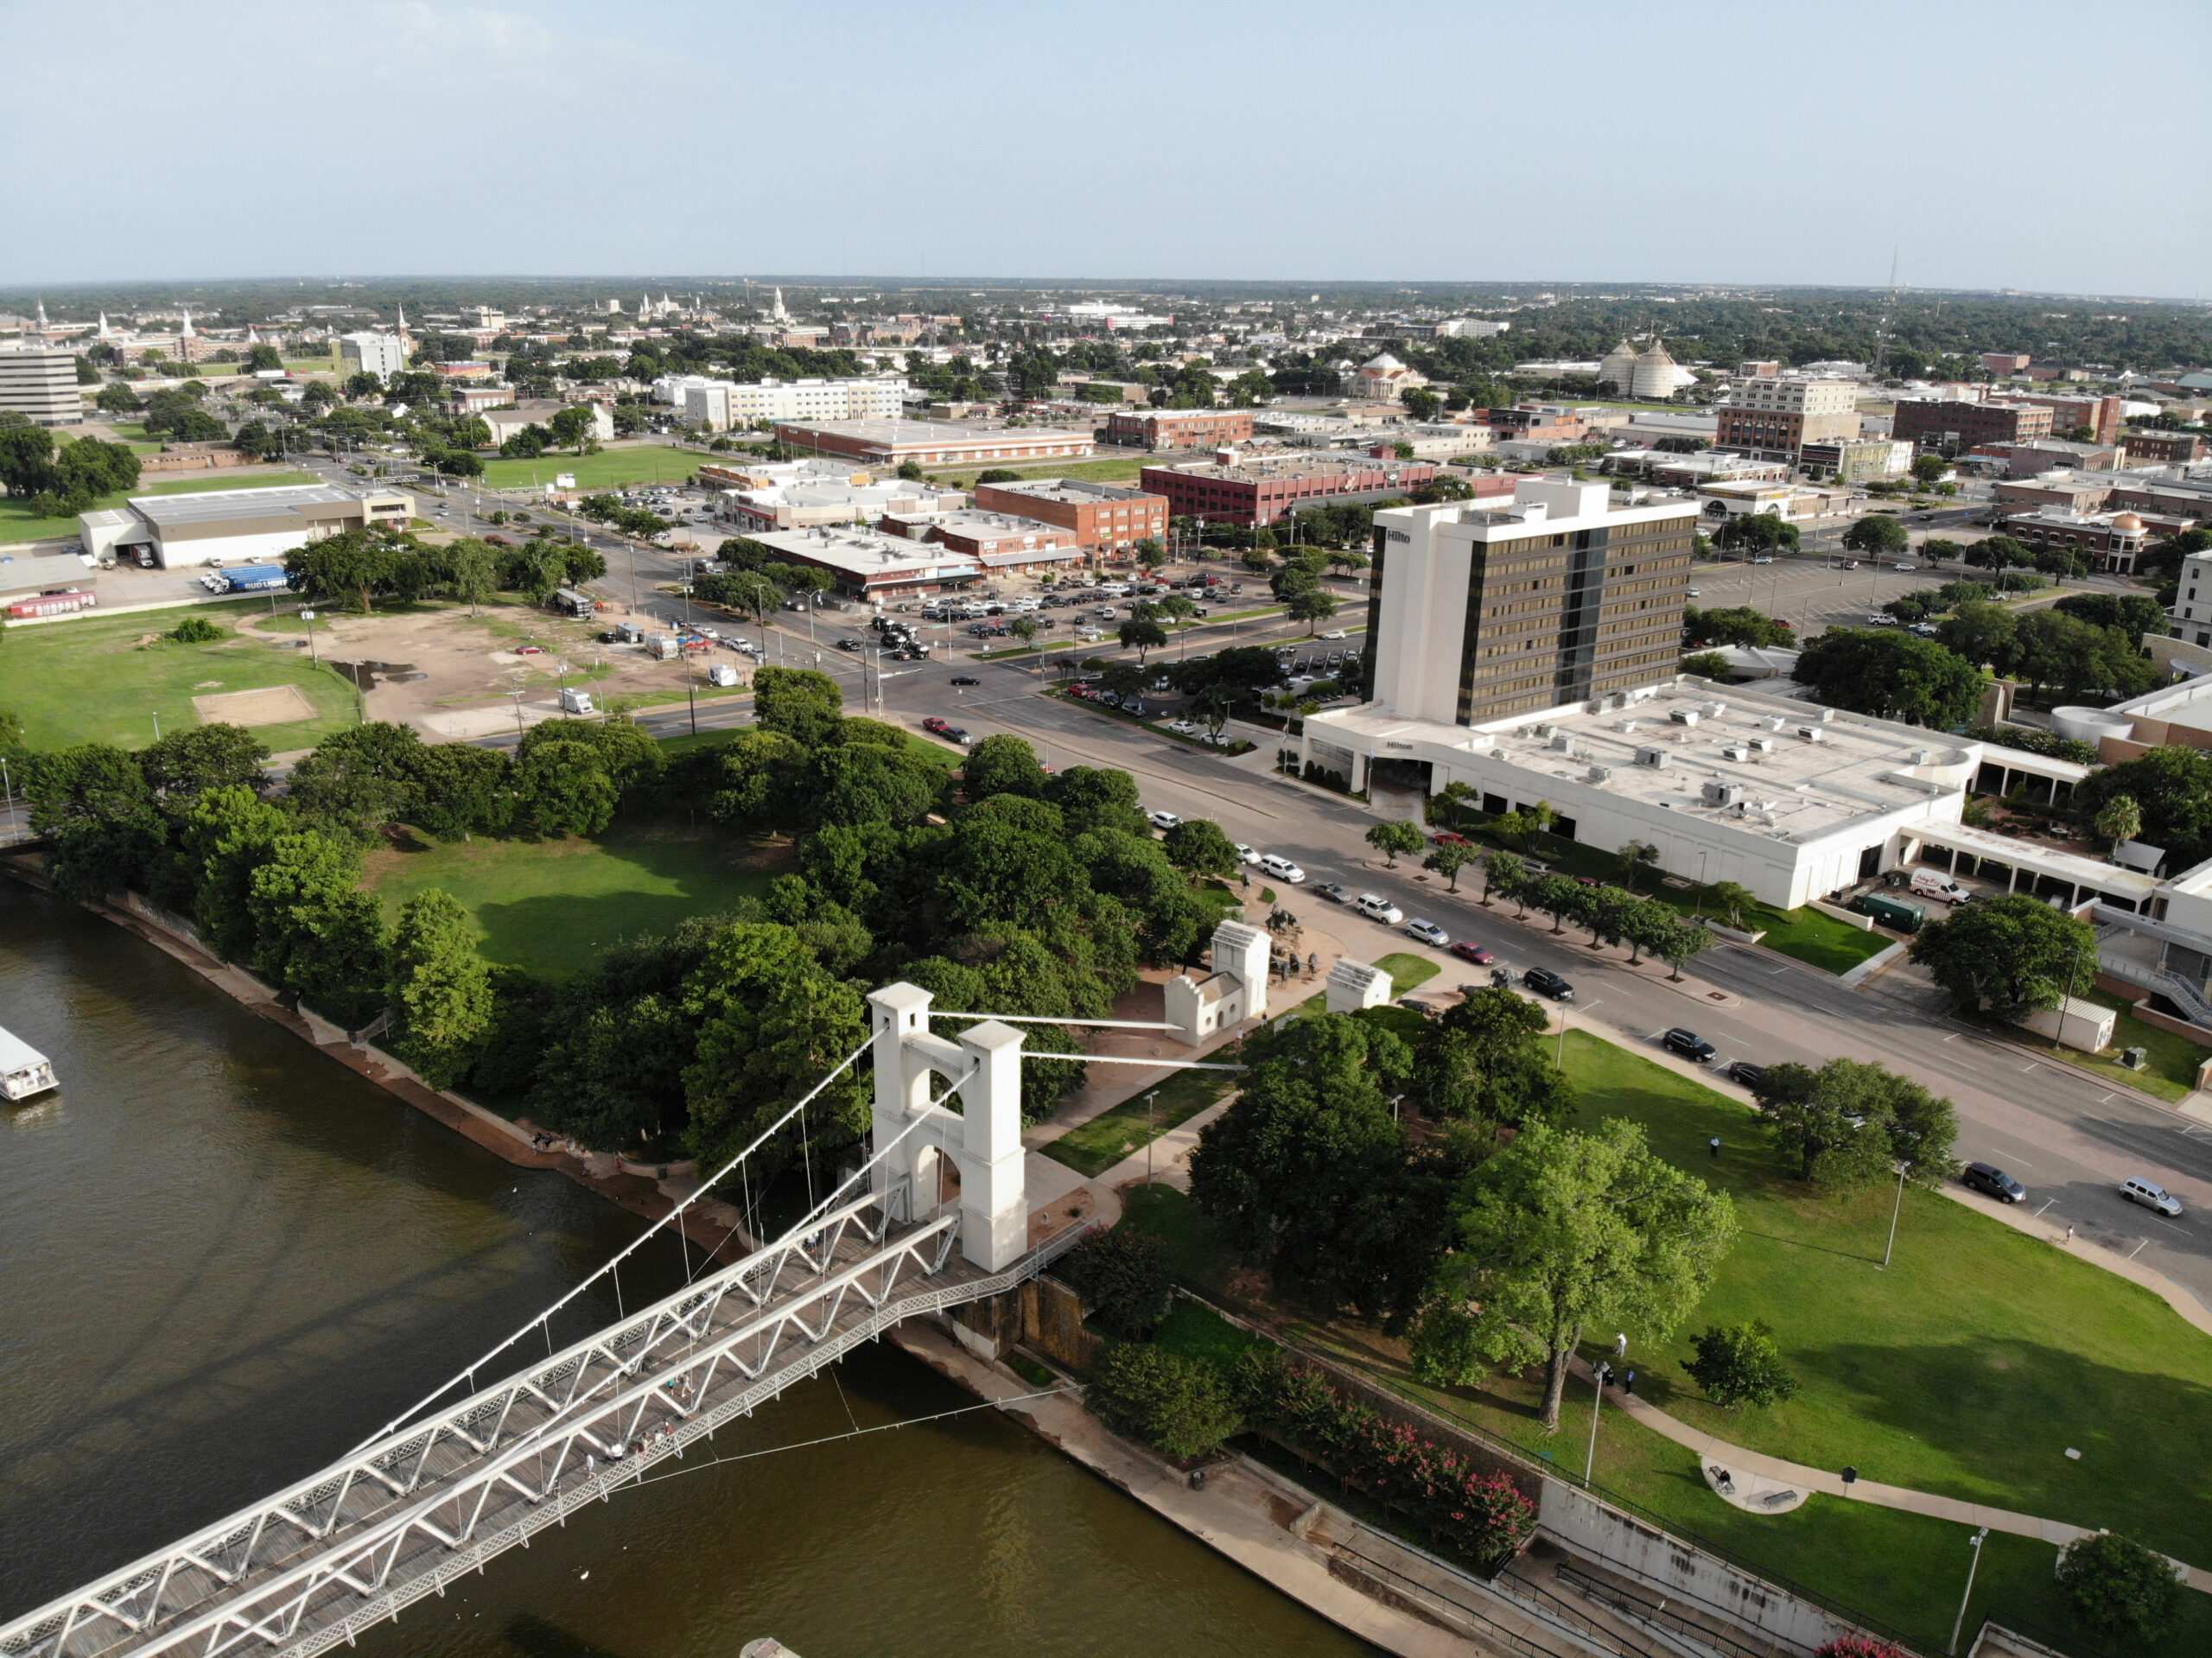 PROS AND CONS OF LIVING IN WACO, TEXAS